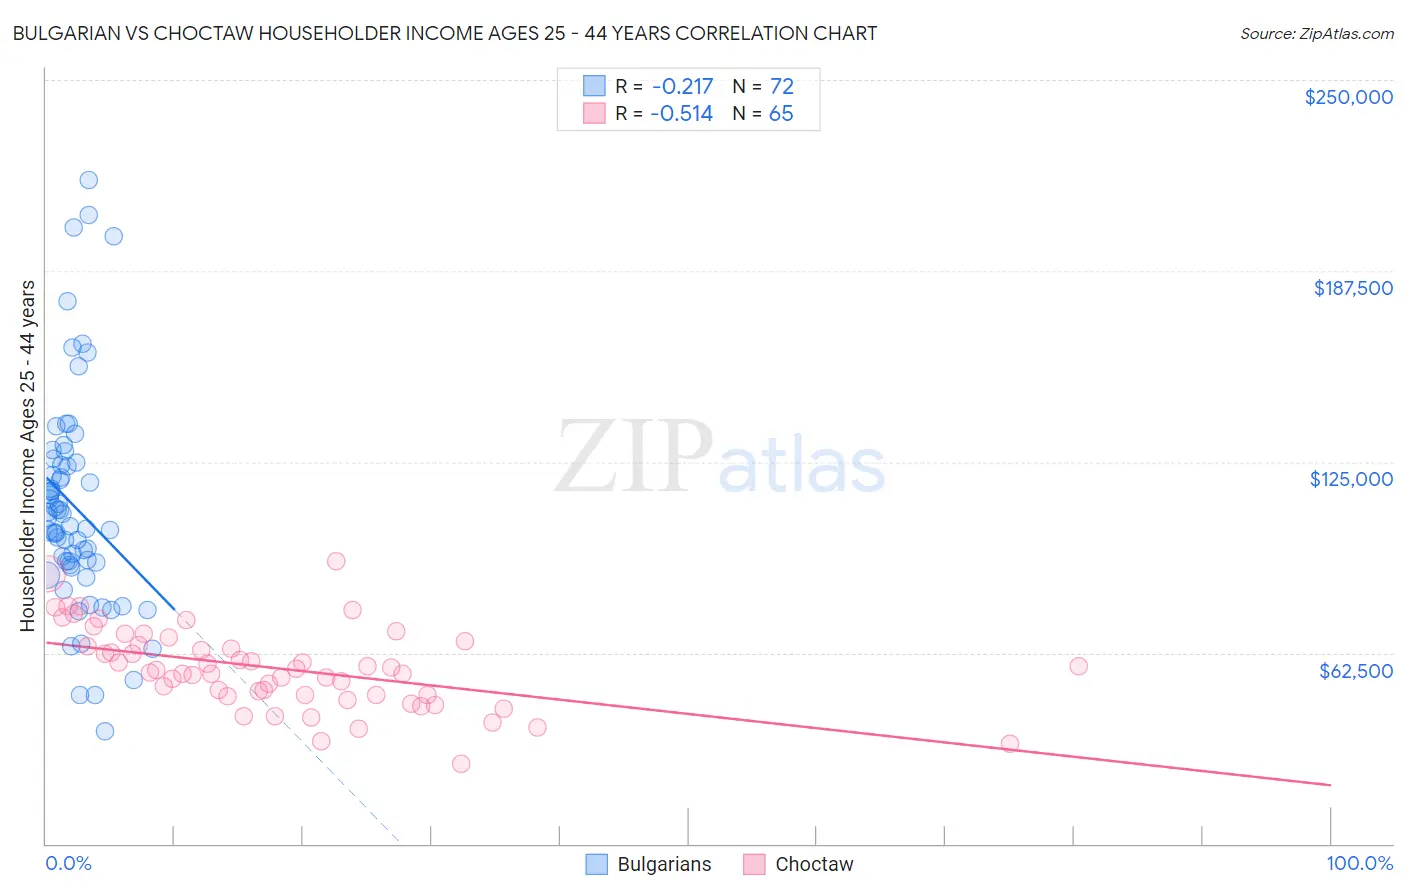 Bulgarian vs Choctaw Householder Income Ages 25 - 44 years